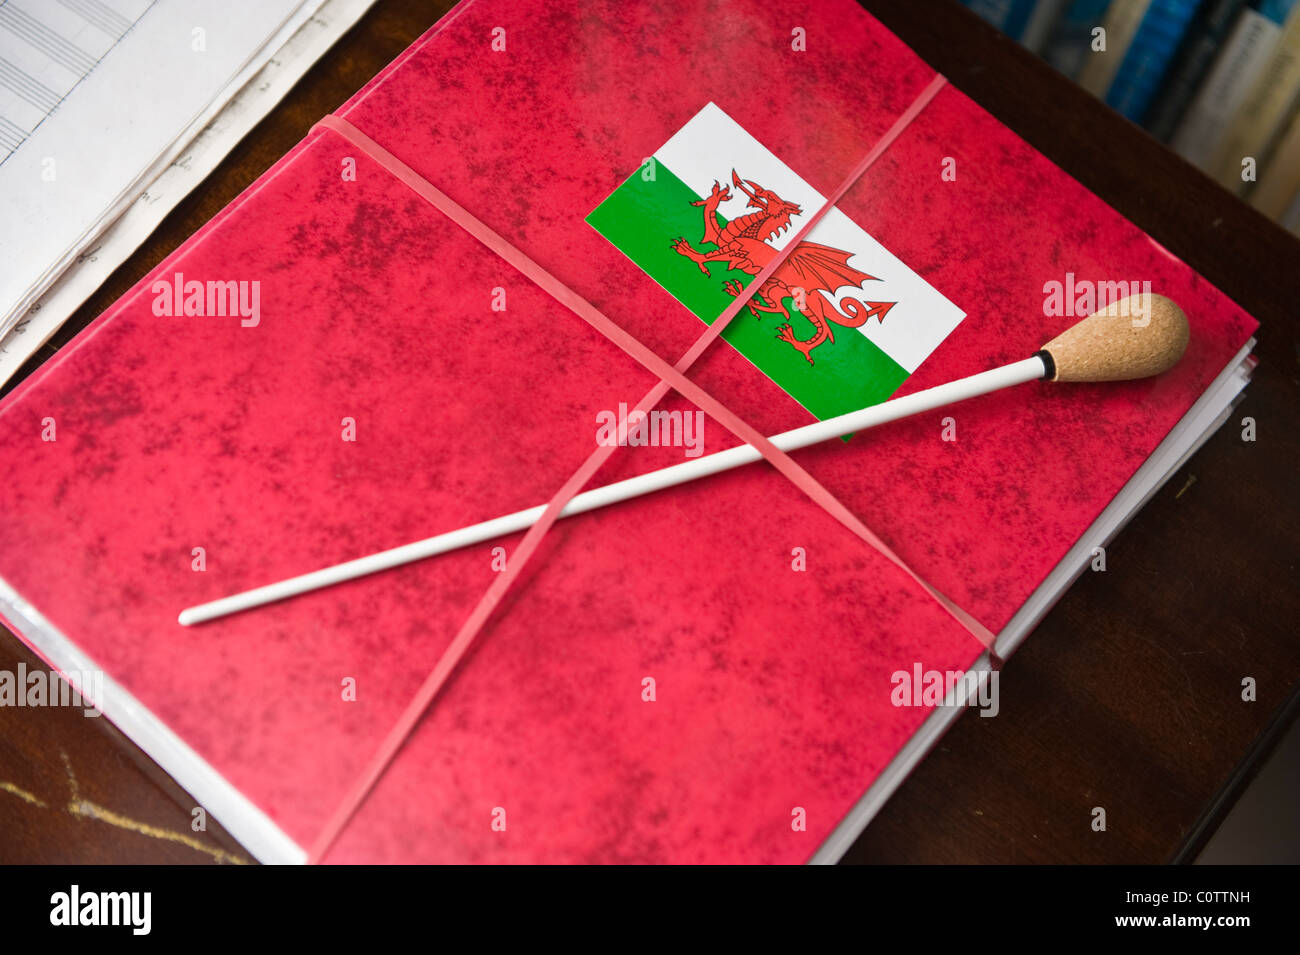 Welsh conductor's baton on file of manuscripts with red dragon flag sticker South Wales UK Stock Photo